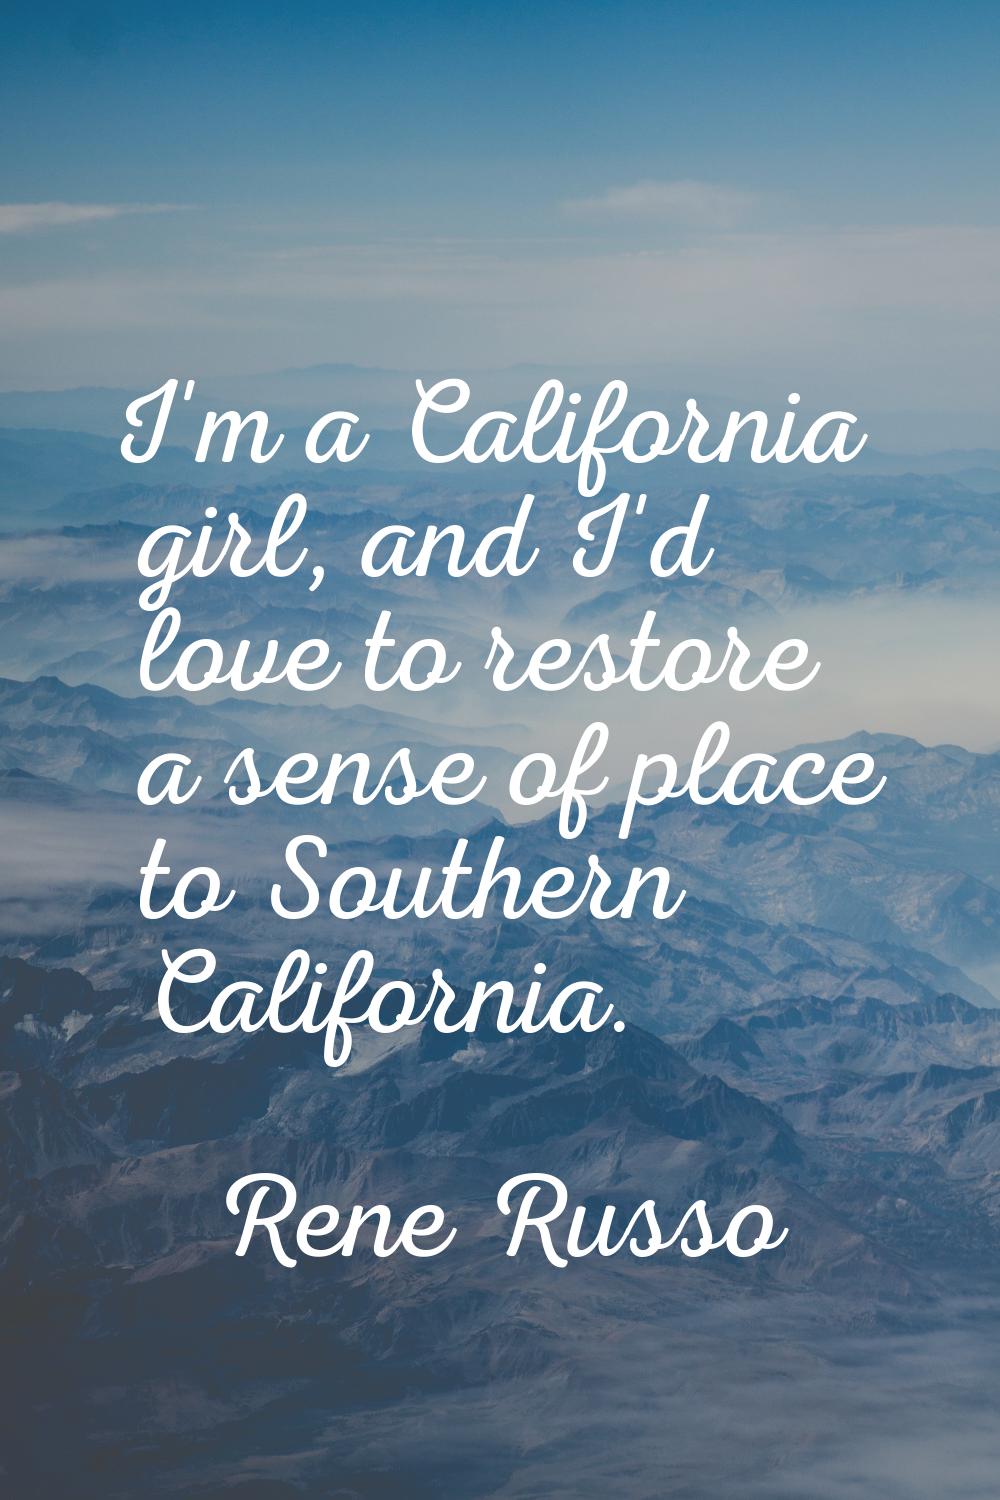 I'm a California girl, and I'd love to restore a sense of place to Southern California.